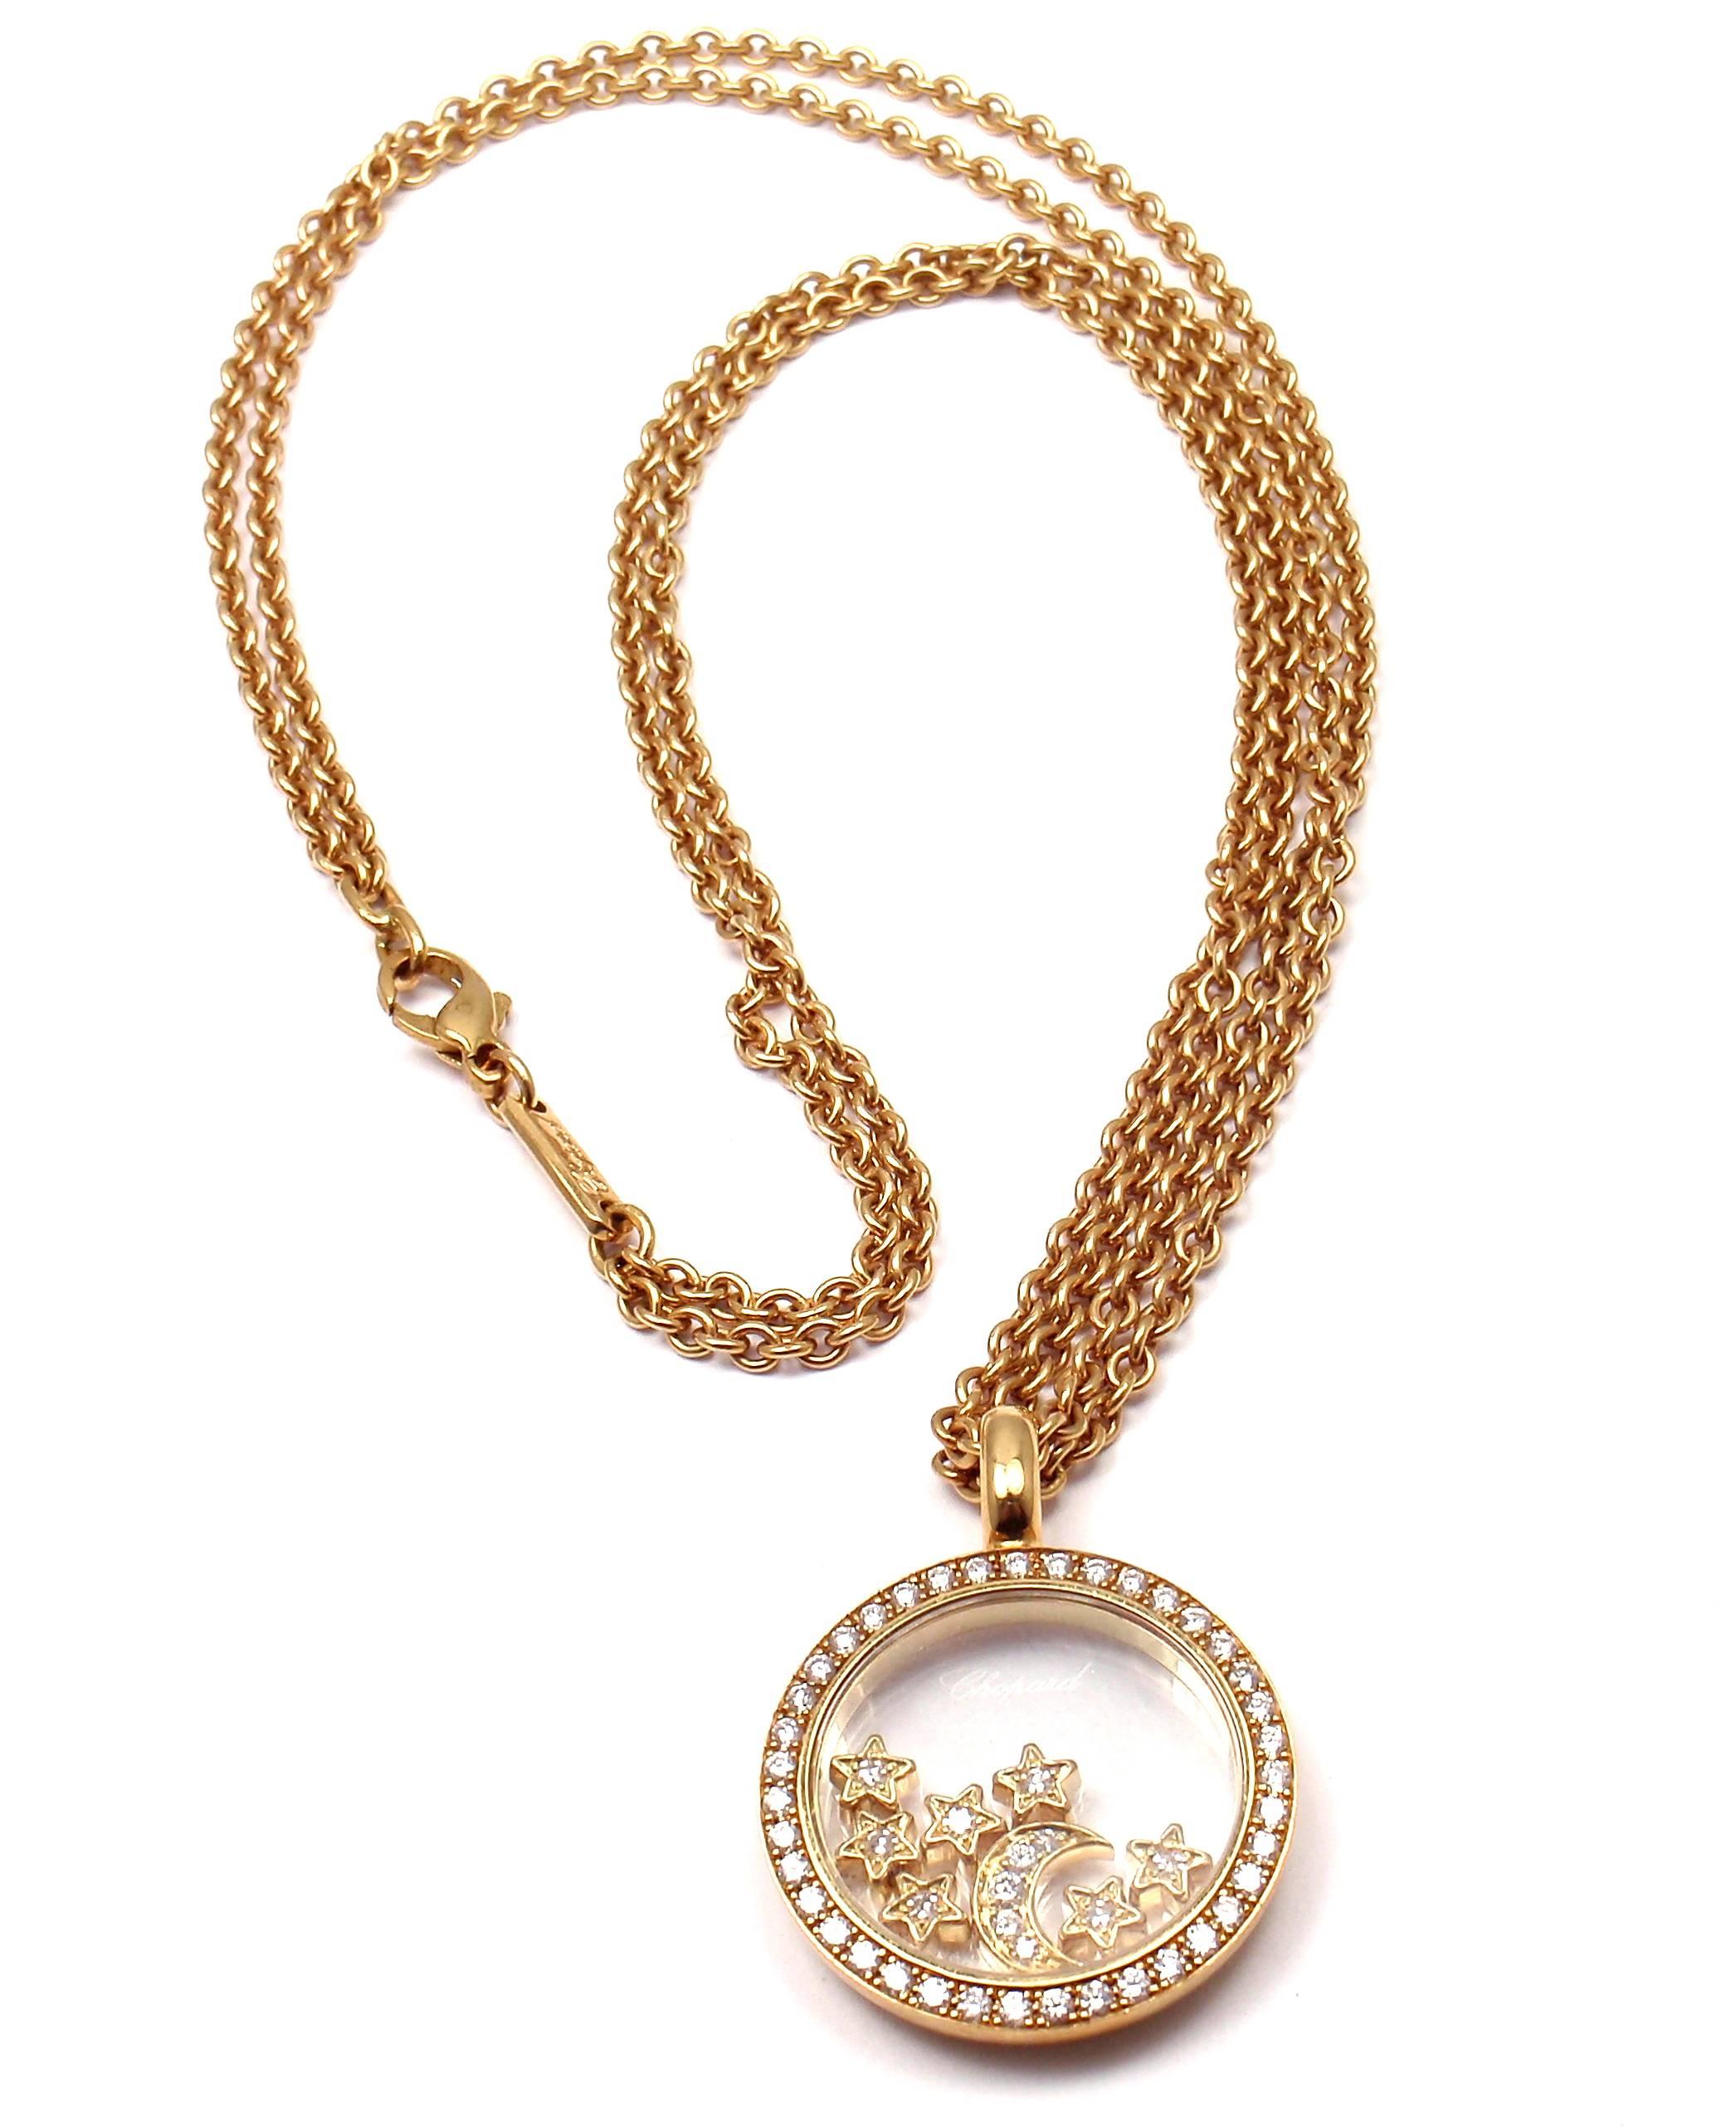 18k Yellow Gold Large Moon & Stars Happy Diamond Necklace by Chopard. With 39 Diamonds at .44ct, 5 Diamonds On Floating Moon at 0.07ct, and 7 Diamonds On Floating Stars at 0.07ct. VS1 clarity, G color Total Diamond Weight: .59CT. 

Details: